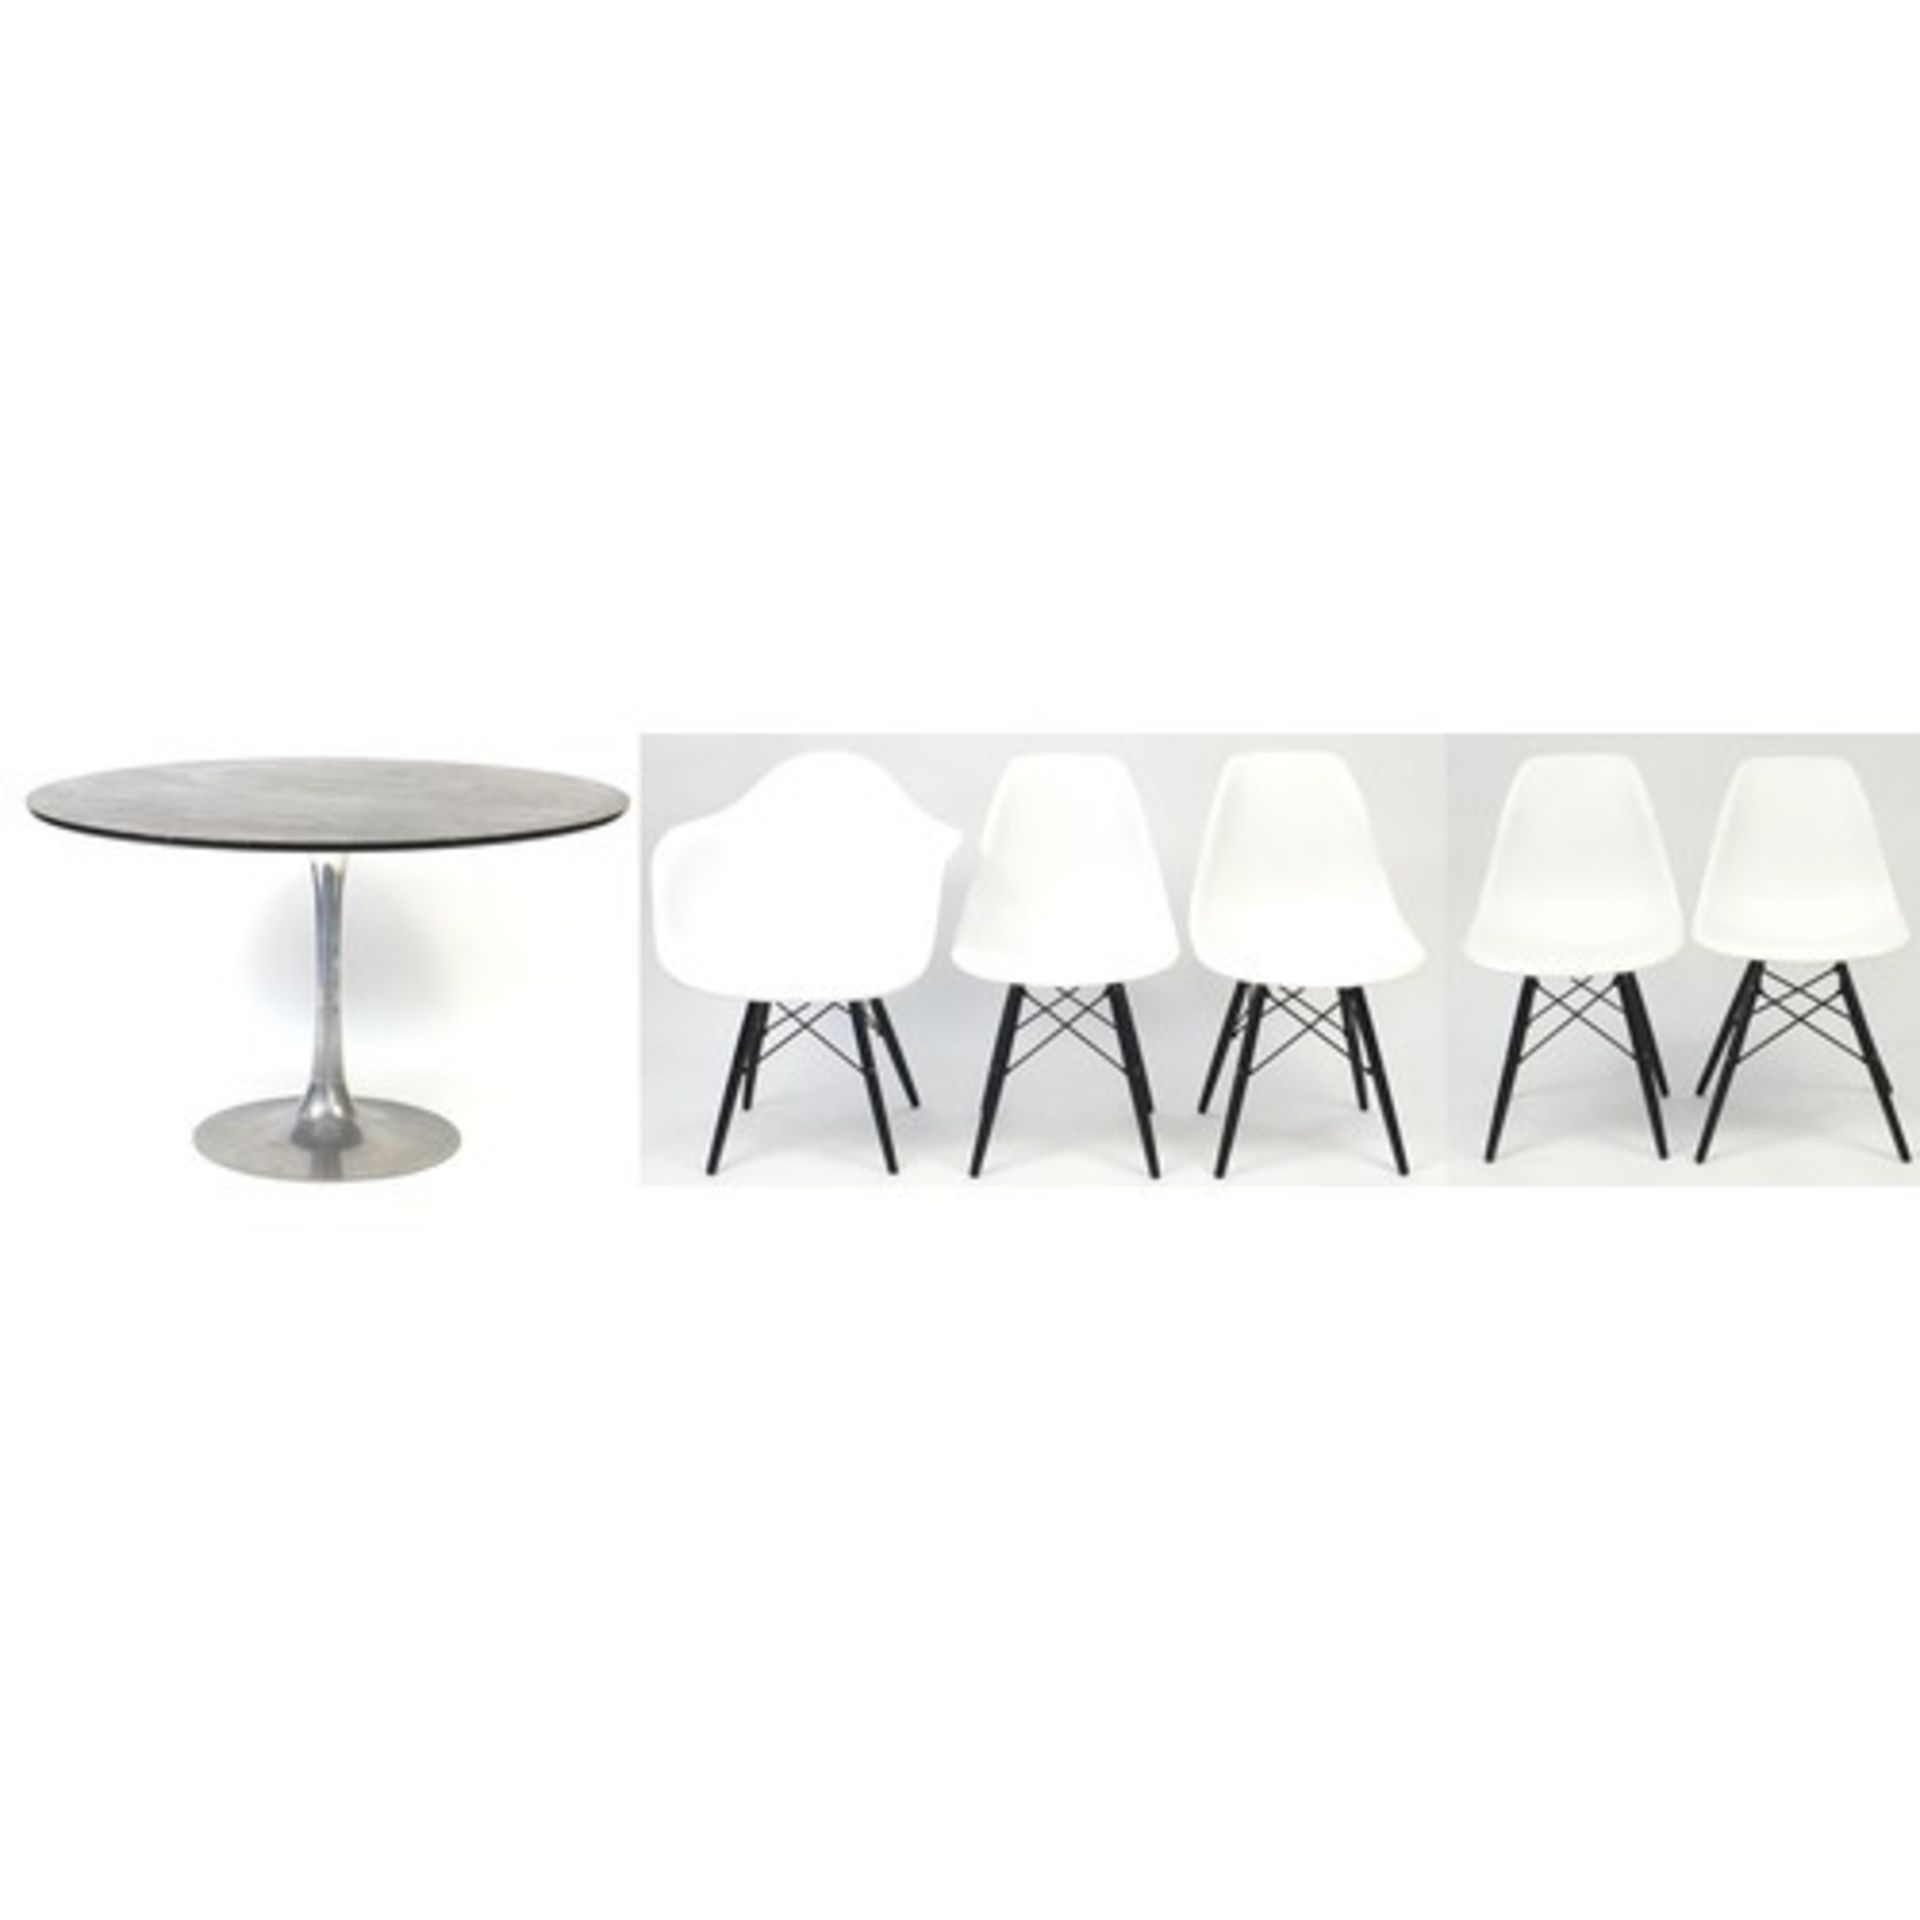 Early Arkana tulip table and five modern Eames design Eiffel Tower chairs, the table 73cm high x 12